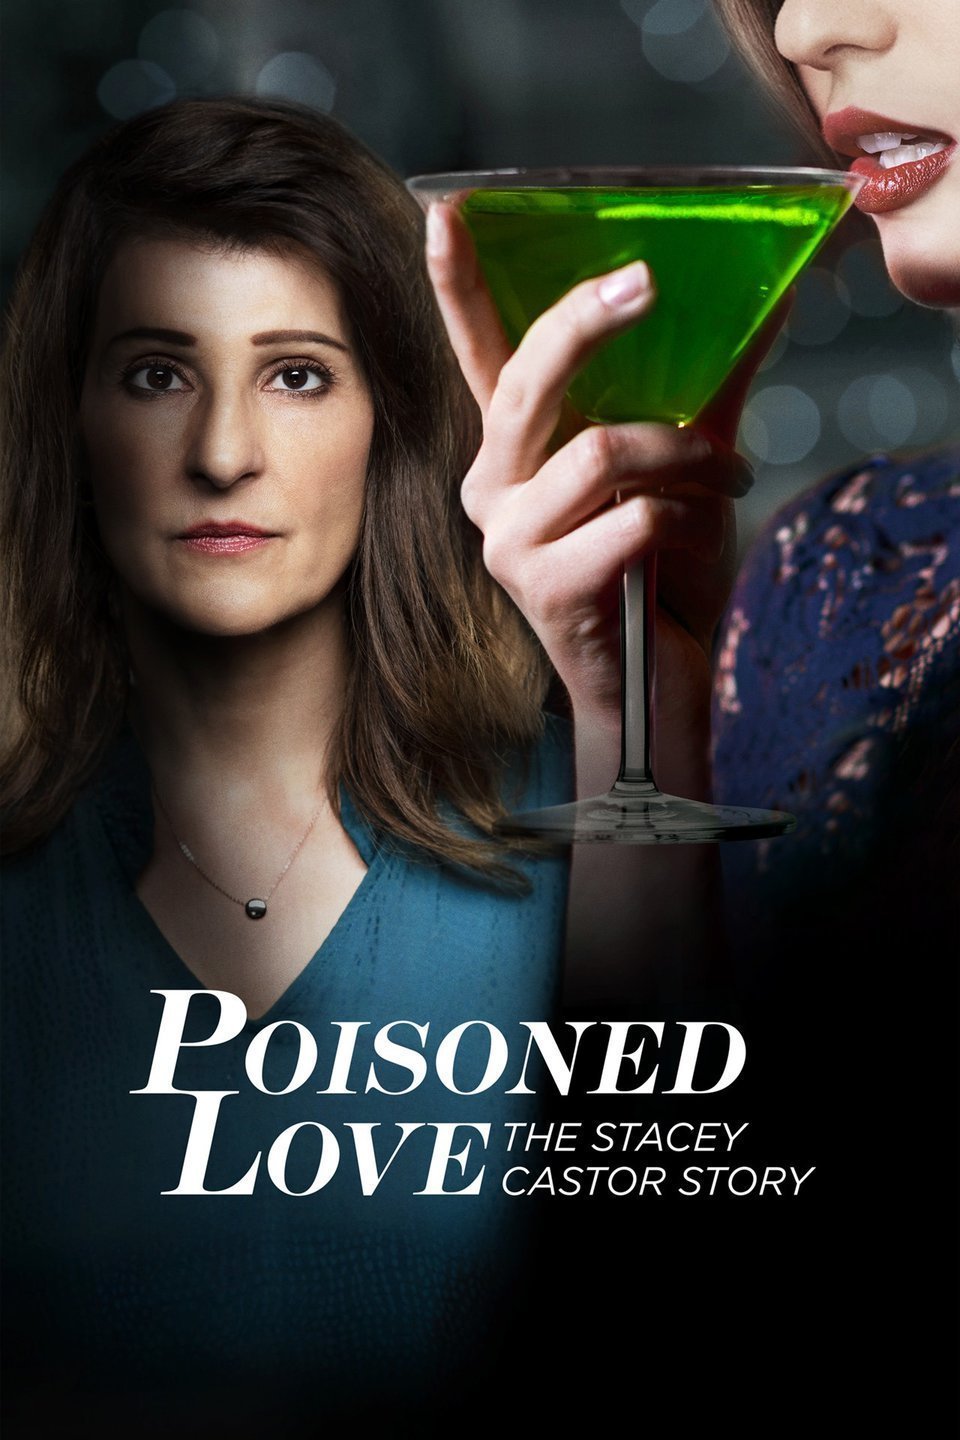 Poster of the movie Poisoned Love: The Stacey Castor Story